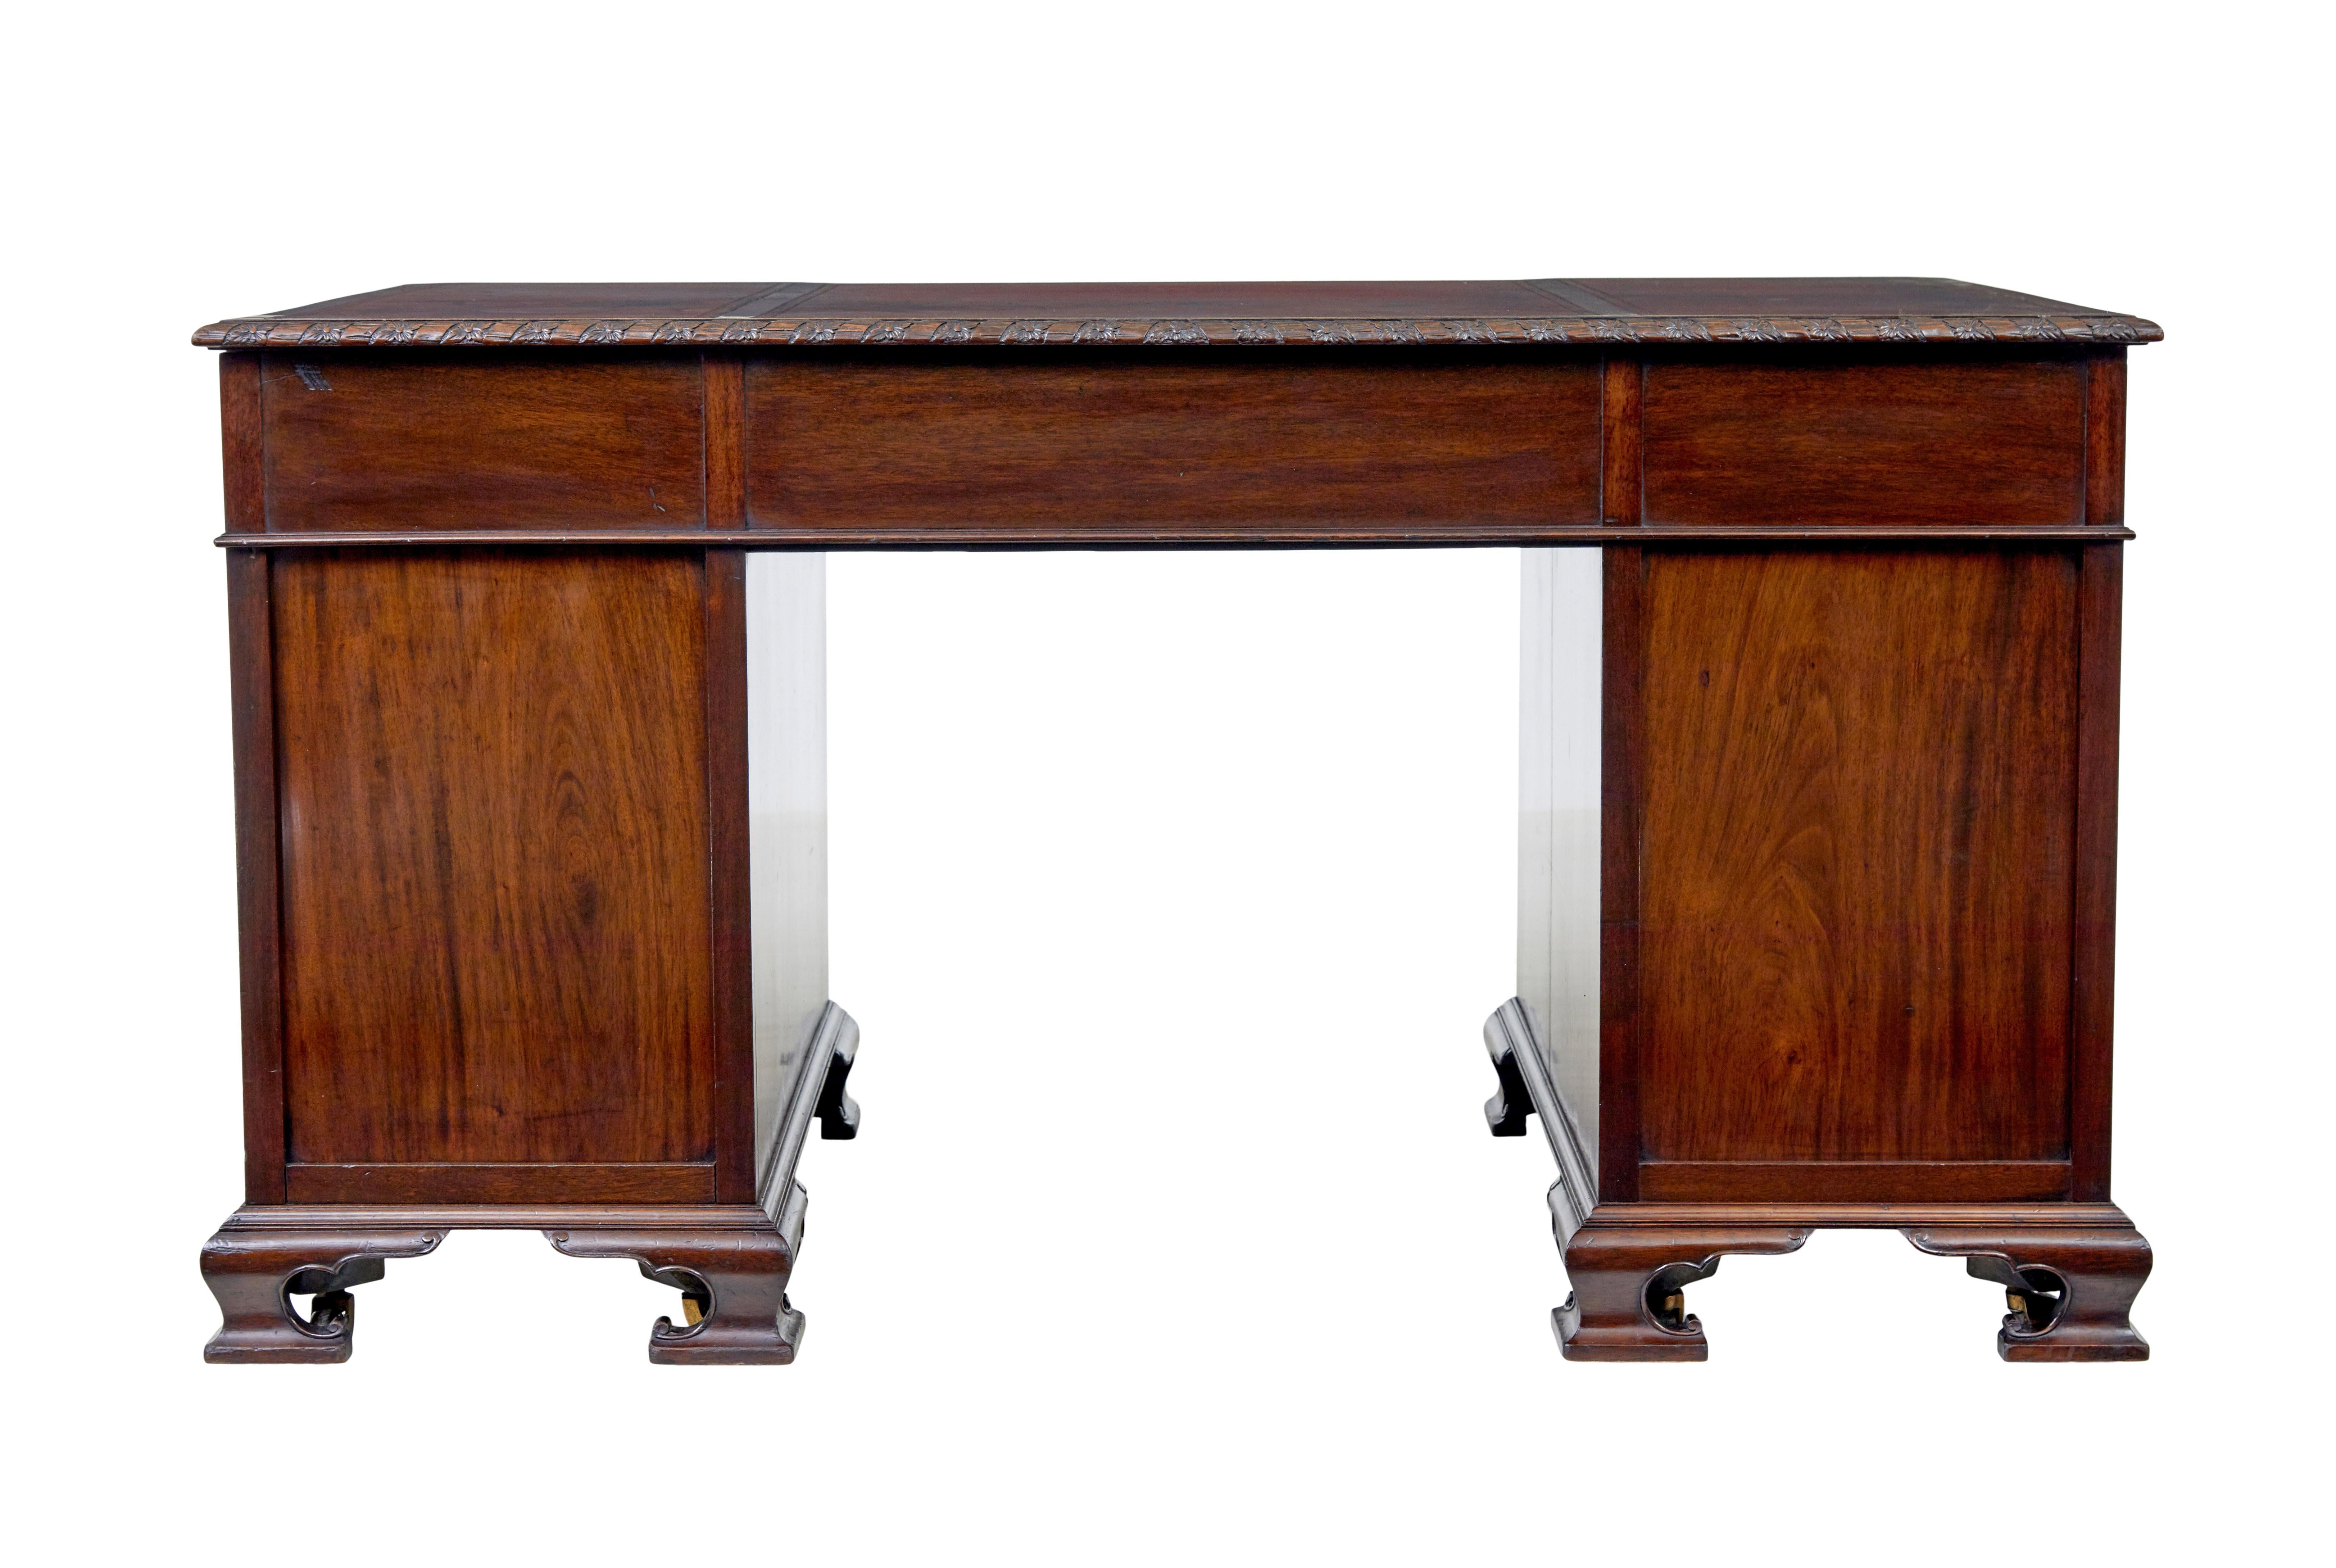 Carved Early 20th century mahogany pedestal desk by Hobbs & Co For Sale